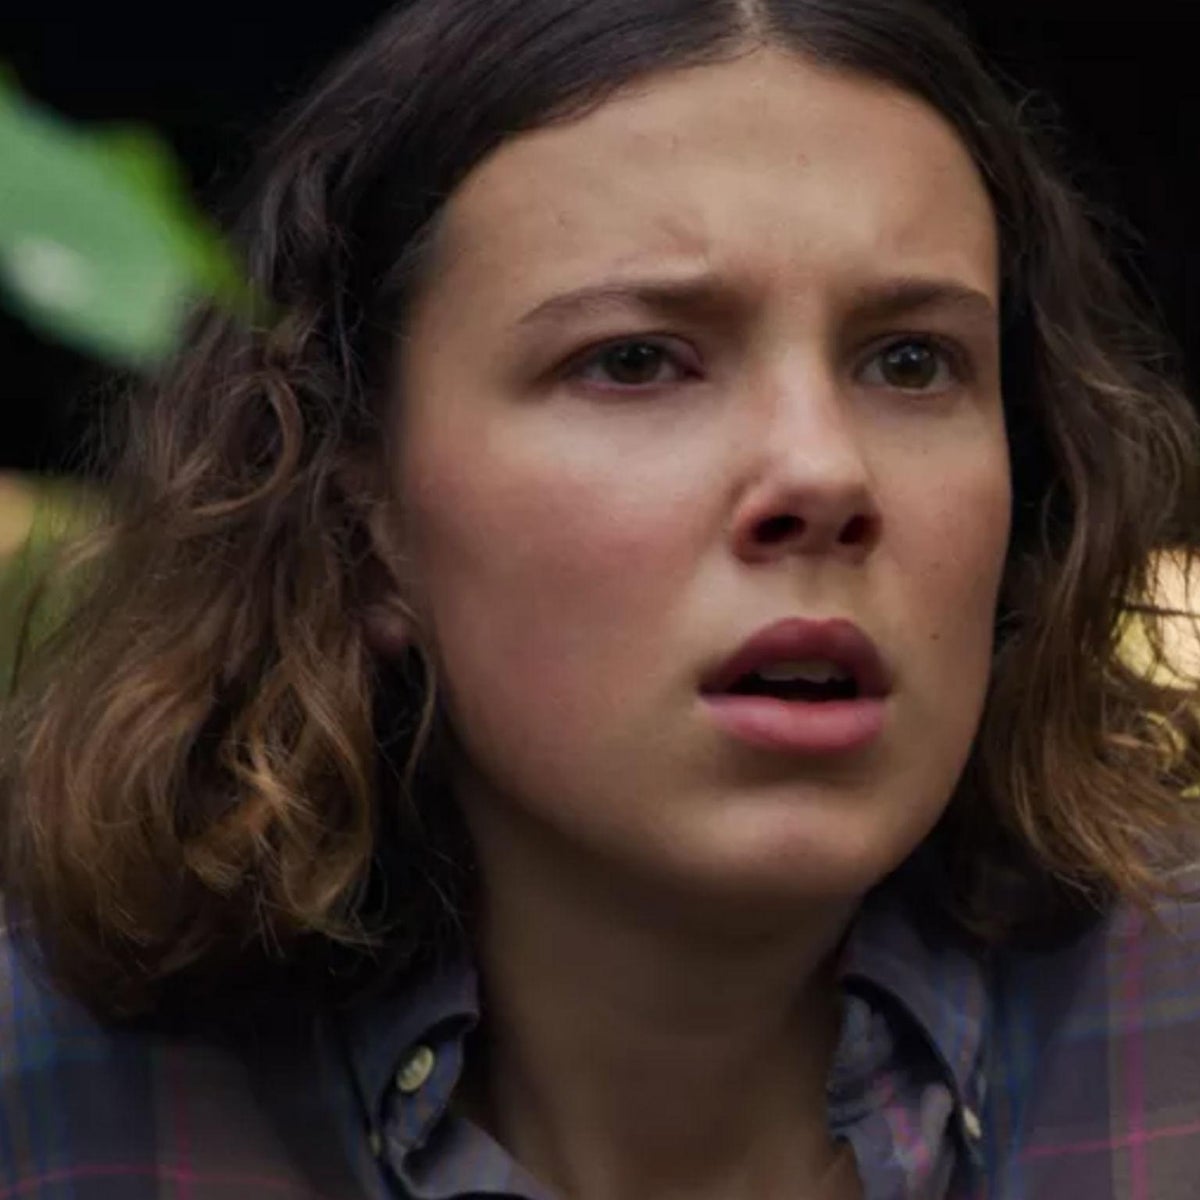 Millie Bobby Brown Shares She's No Longer A Flat-Earther